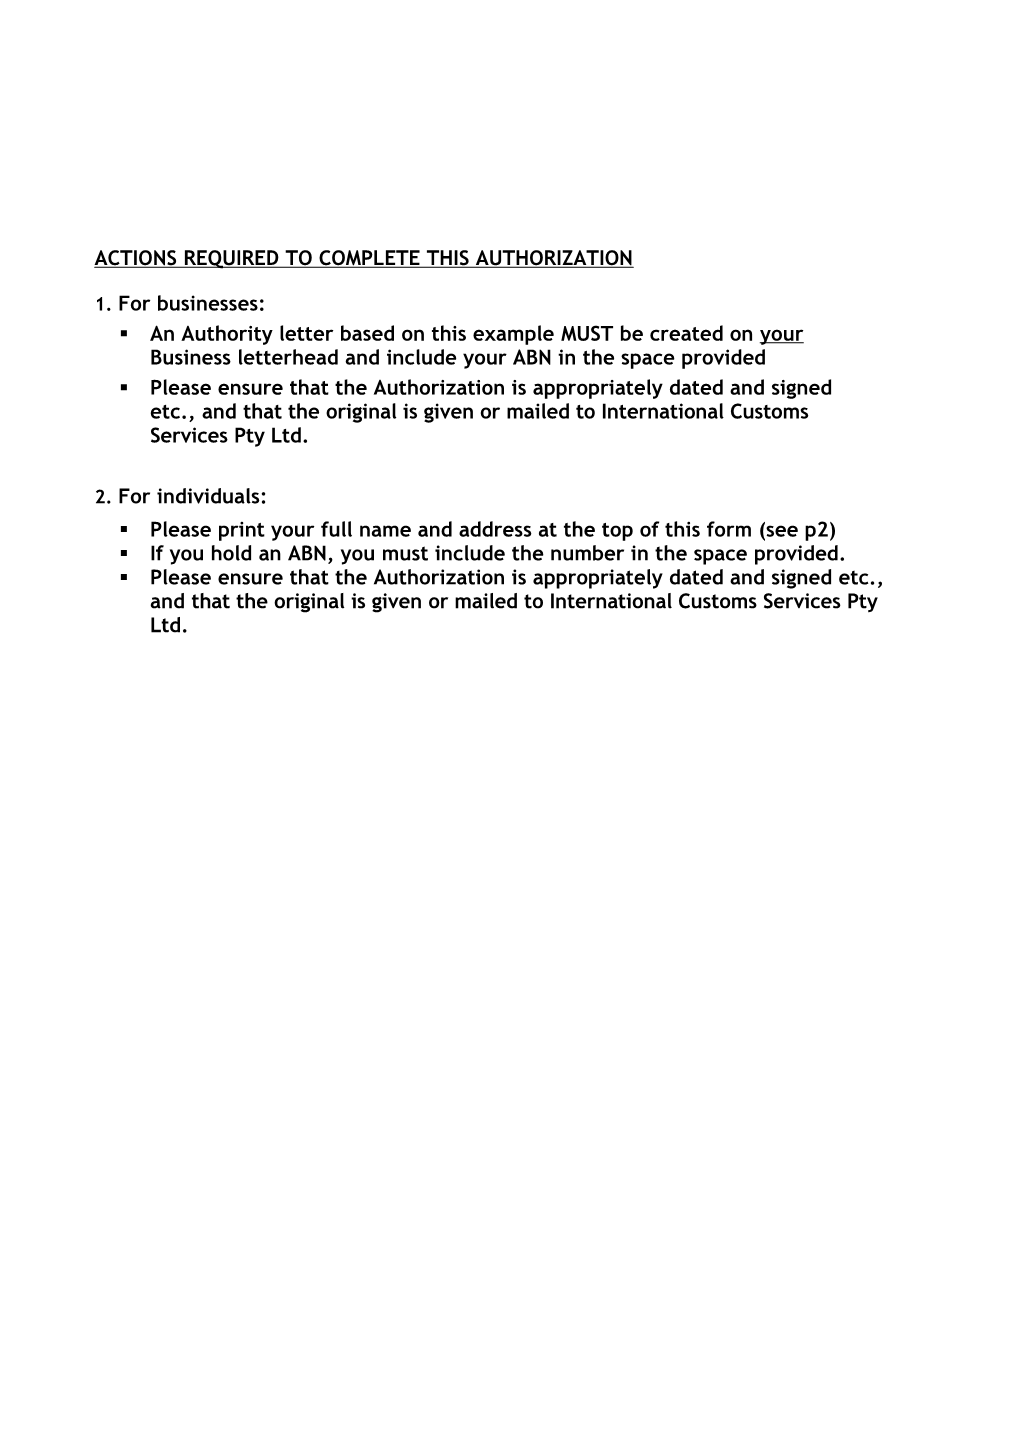 Actions Required to Complete This Authorization